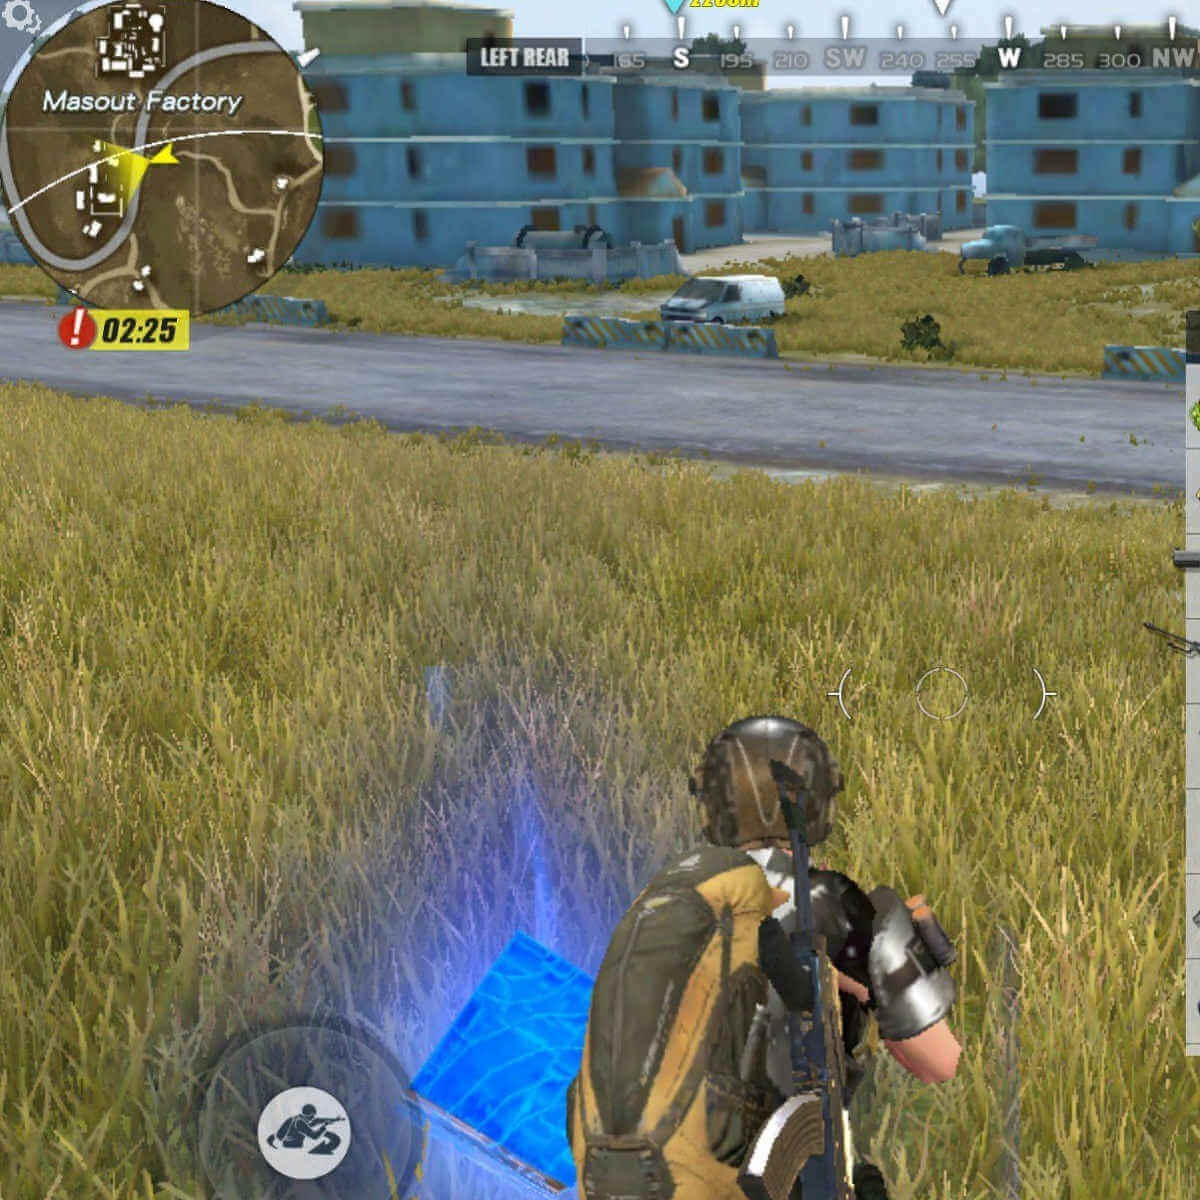 Rules of Survival currently doesn't support emulator